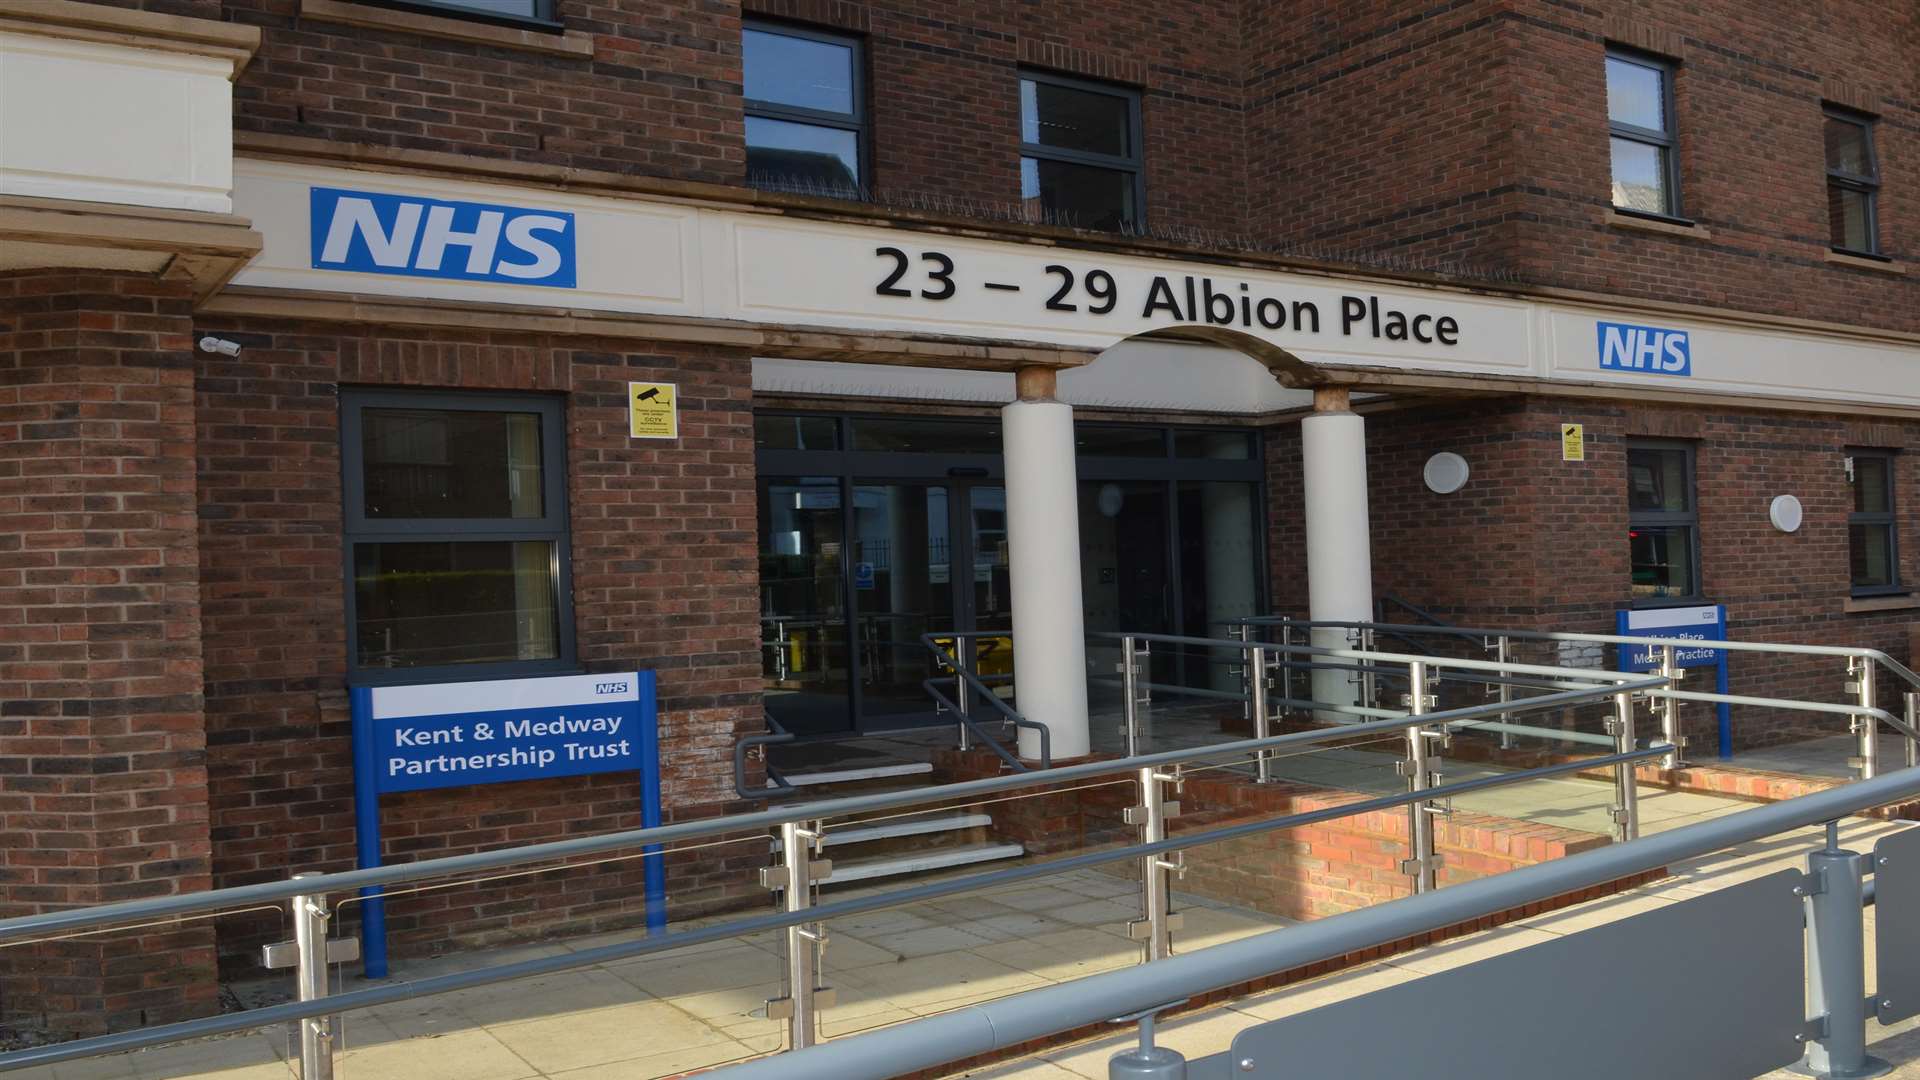 The NHS building at Albion Place